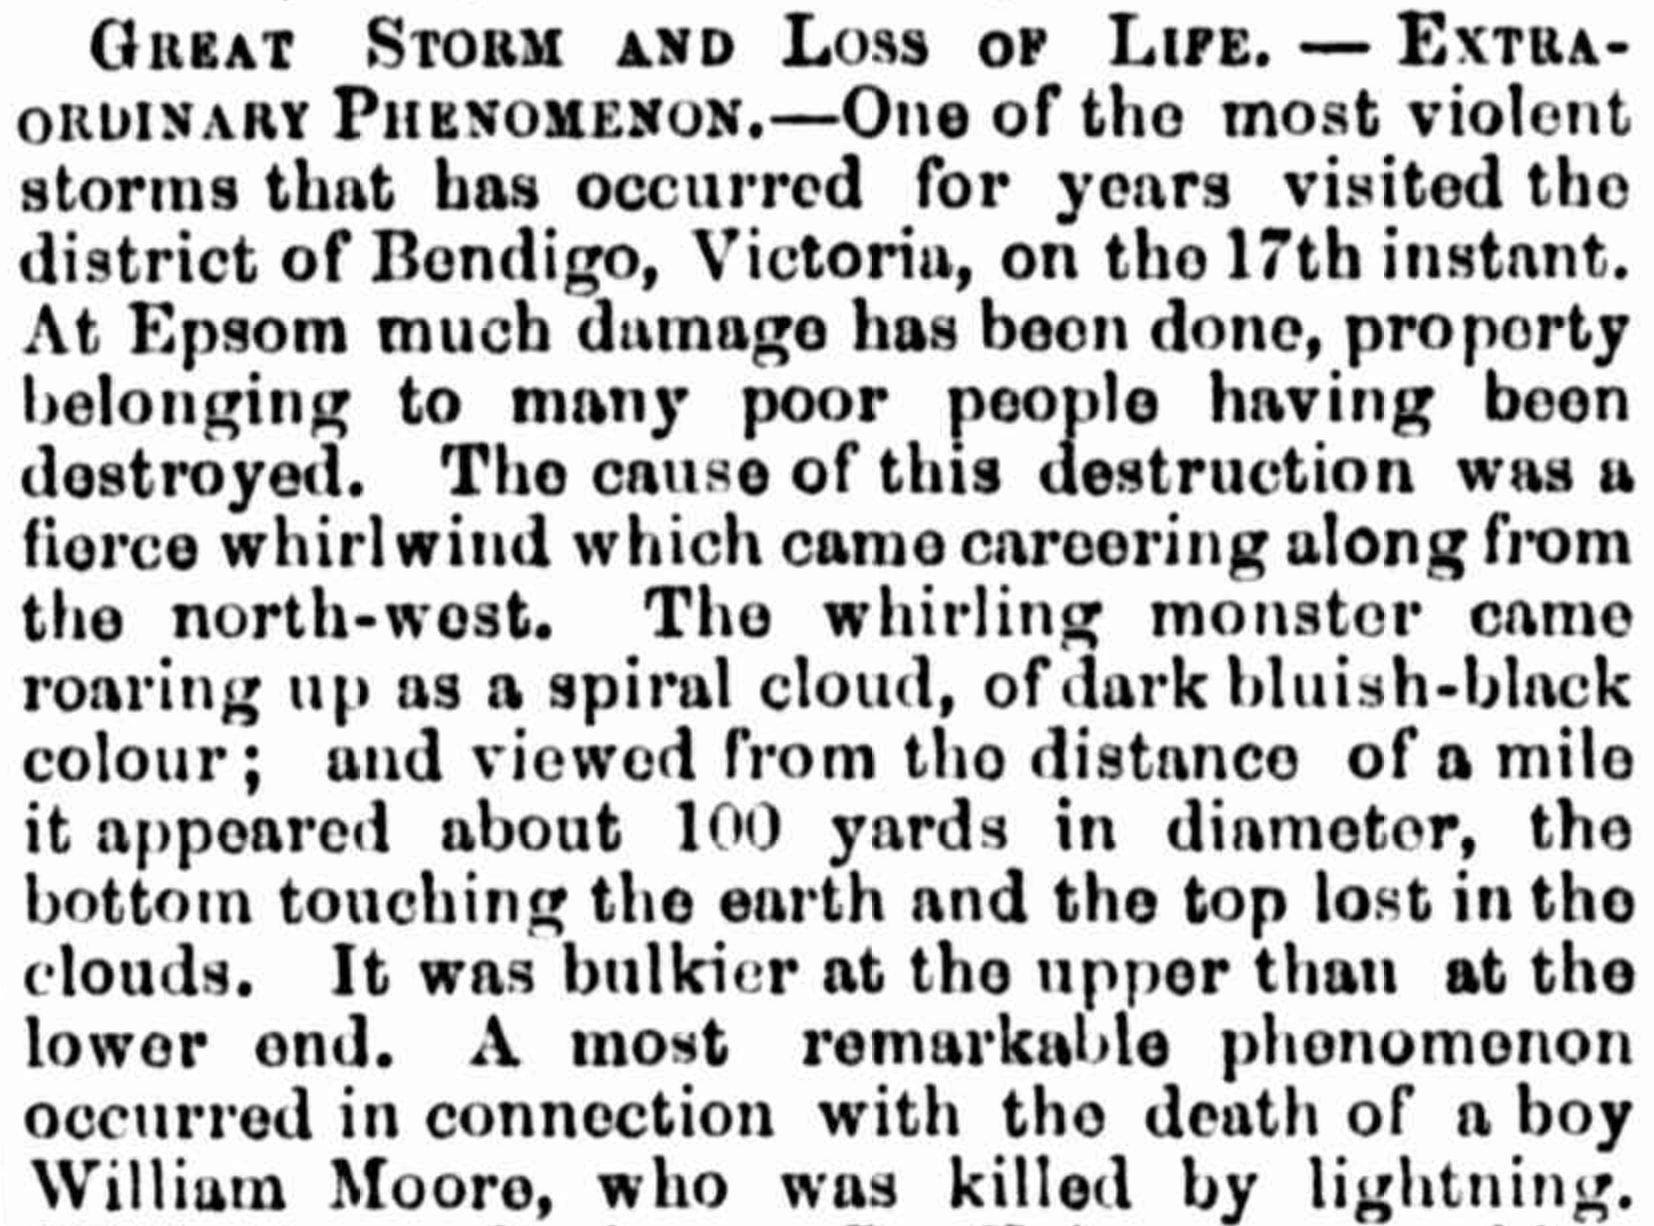 Newspaper article with the title Great Storm and Loss of Life - EXTRAORDINARY PHENOMENON